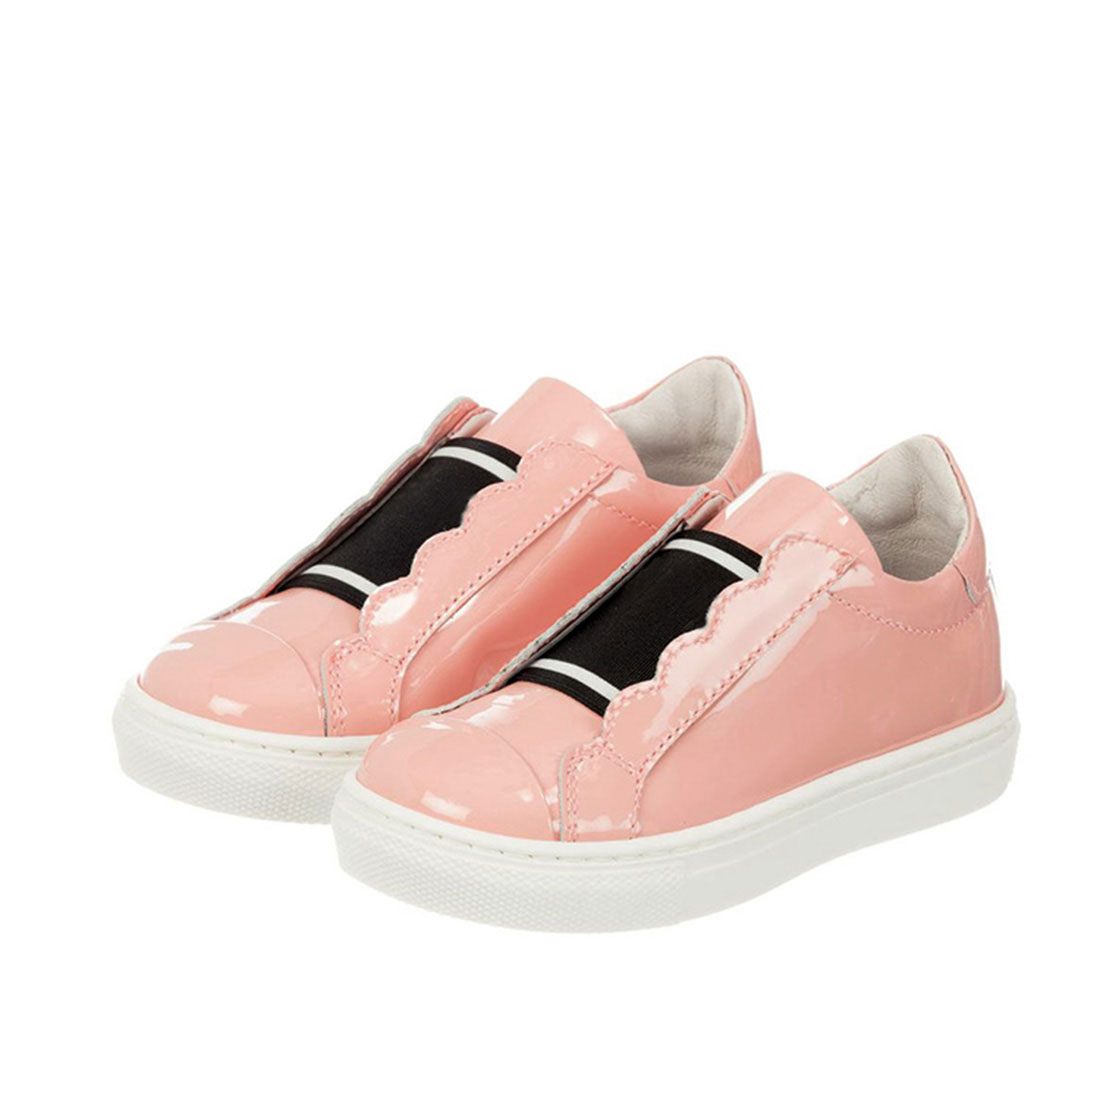 Best patent leather pink flat round toe casual walking rippled edge kids shoes